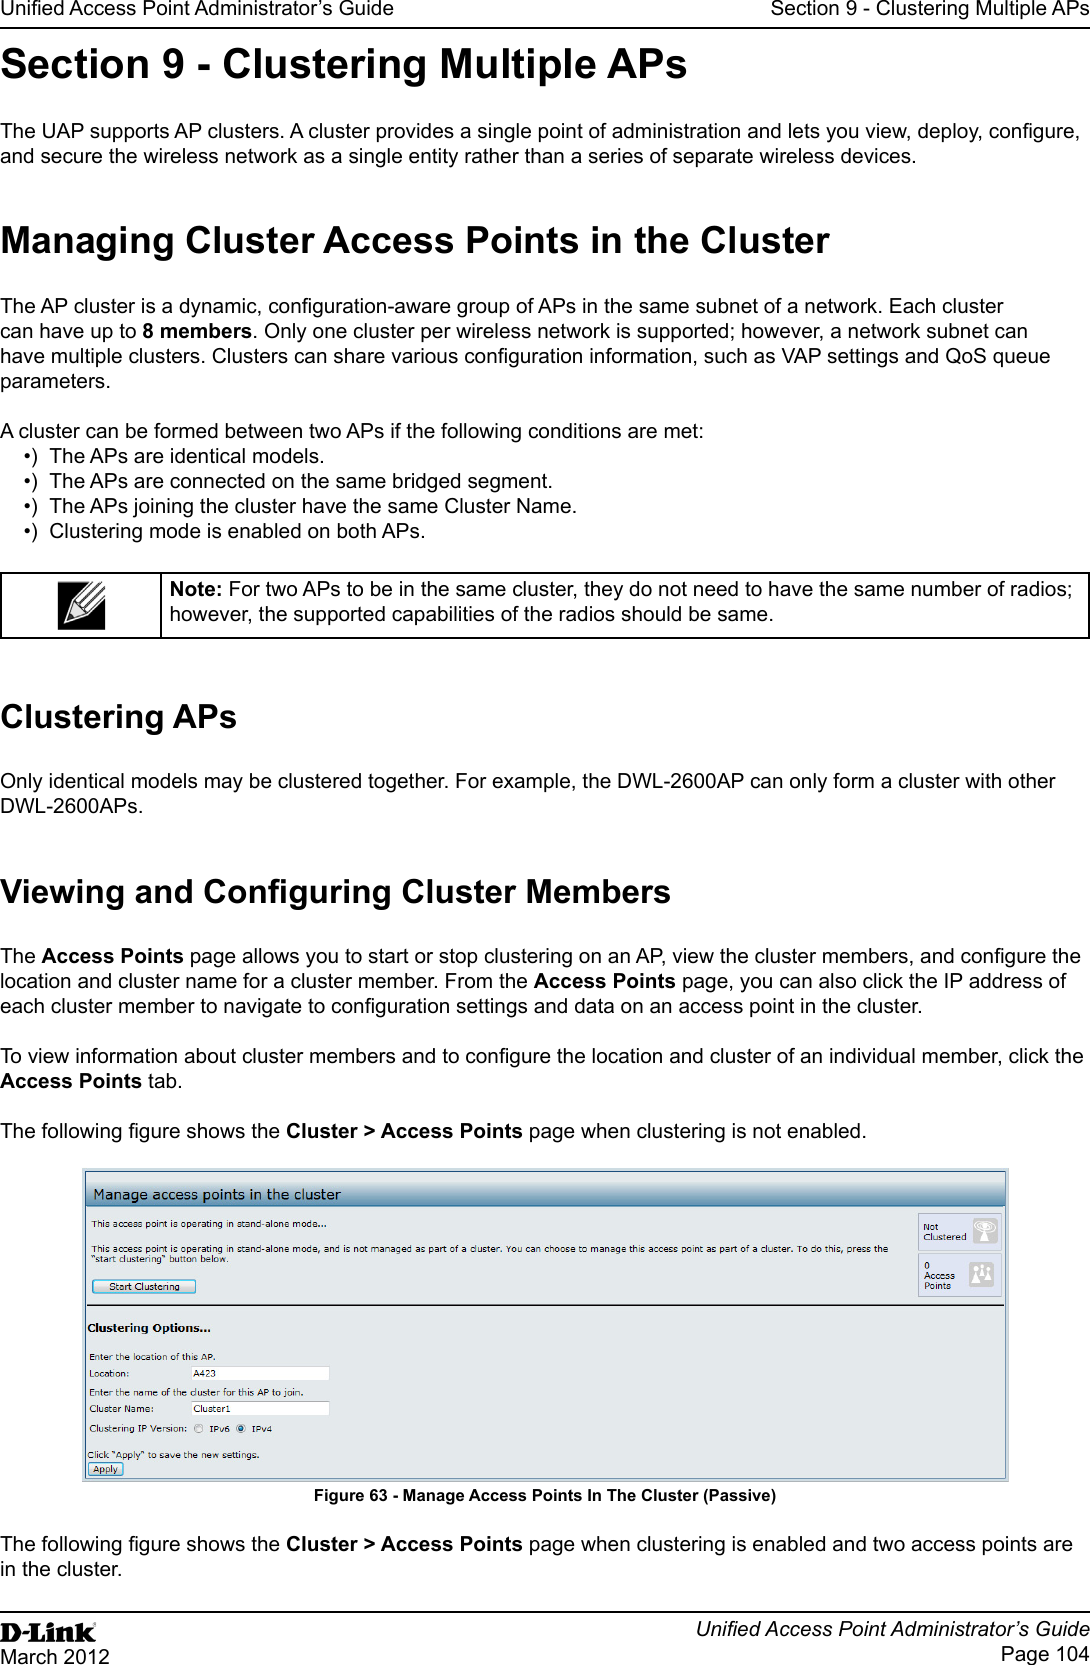 Unied Access Point Administrator’s GuideUnied Access Point Administrator’s GuidePage 104March 2012Section 9 - Clustering Multiple APsSection 9 - Clustering Multiple APsThe UAP supports AP clusters. A cluster provides a single point of administration and lets you view, deploy, congure, and secure the wireless network as a single entity rather than a series of separate wireless devices. Managing Cluster Access Points in the ClusterThe AP cluster is a dynamic, conguration-aware group of APs in the same subnet of a network. Each cluster can have up to 8 members. Only one cluster per wireless network is supported; however, a network subnet can have multiple clusters. Clusters can share various conguration information, such as VAP settings and QoS queue parameters.A cluster can be formed between two APs if the following conditions are met:•)  The APs are identical models.•)  The APs are connected on the same bridged segment.•)  The APs joining the cluster have the same Cluster Name.•)  Clustering mode is enabled on both APs.Note: For two APs to be in the same cluster, they do not need to have the same number of radios; however, the supported capabilities of the radios should be same.Clustering APsOnly identical models may be clustered together. For example, the DWL-2600AP can only form a cluster with other DWL-2600APs.Viewing and Conguring Cluster MembersThe Access Points page allows you to start or stop clustering on an AP, view the cluster members, and congure the location and cluster name for a cluster member. From the Access Points page, you can also click the IP address of each cluster member to navigate to conguration settings and data on an access point in the cluster. To view information about cluster members and to congure the location and cluster of an individual member, click the Access Points tab.The following gure shows the Cluster &gt; Access Points page when clustering is not enabled.Figure 63 - Manage Access Points In The Cluster (Passive)The following gure shows the Cluster &gt; Access Points page when clustering is enabled and two access points are in the cluster.